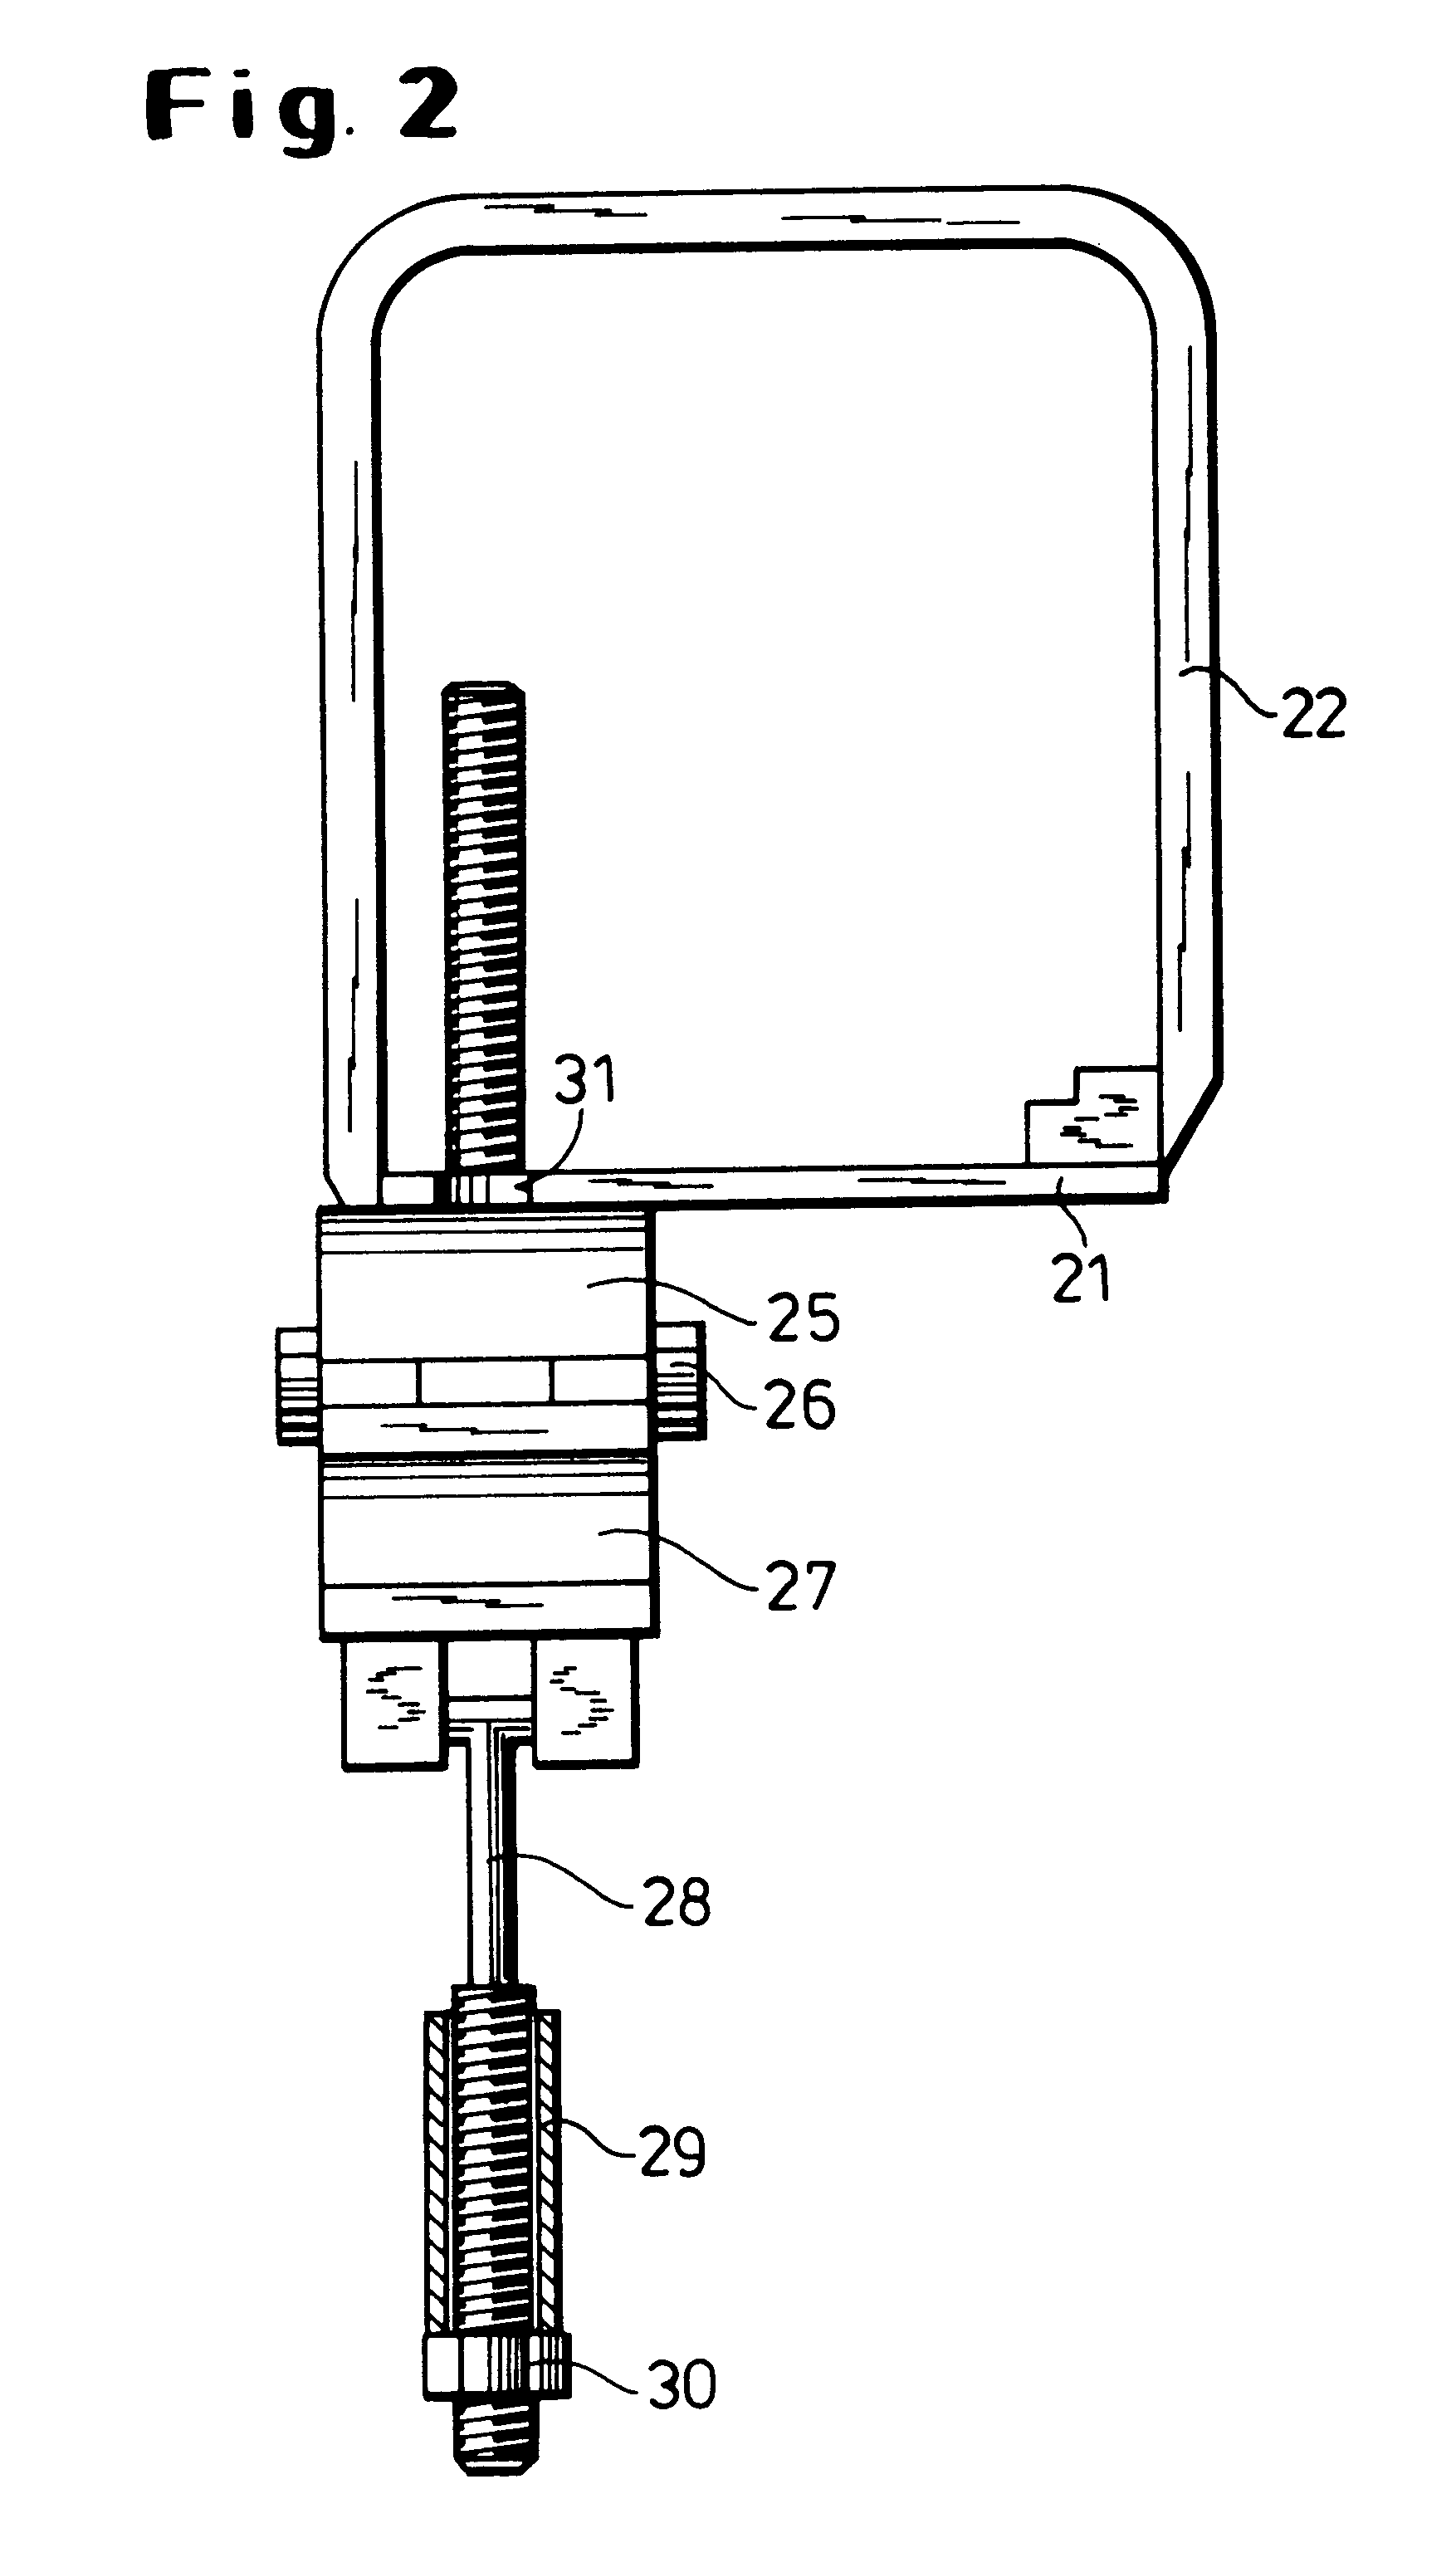 Method and apparatus for directional boring